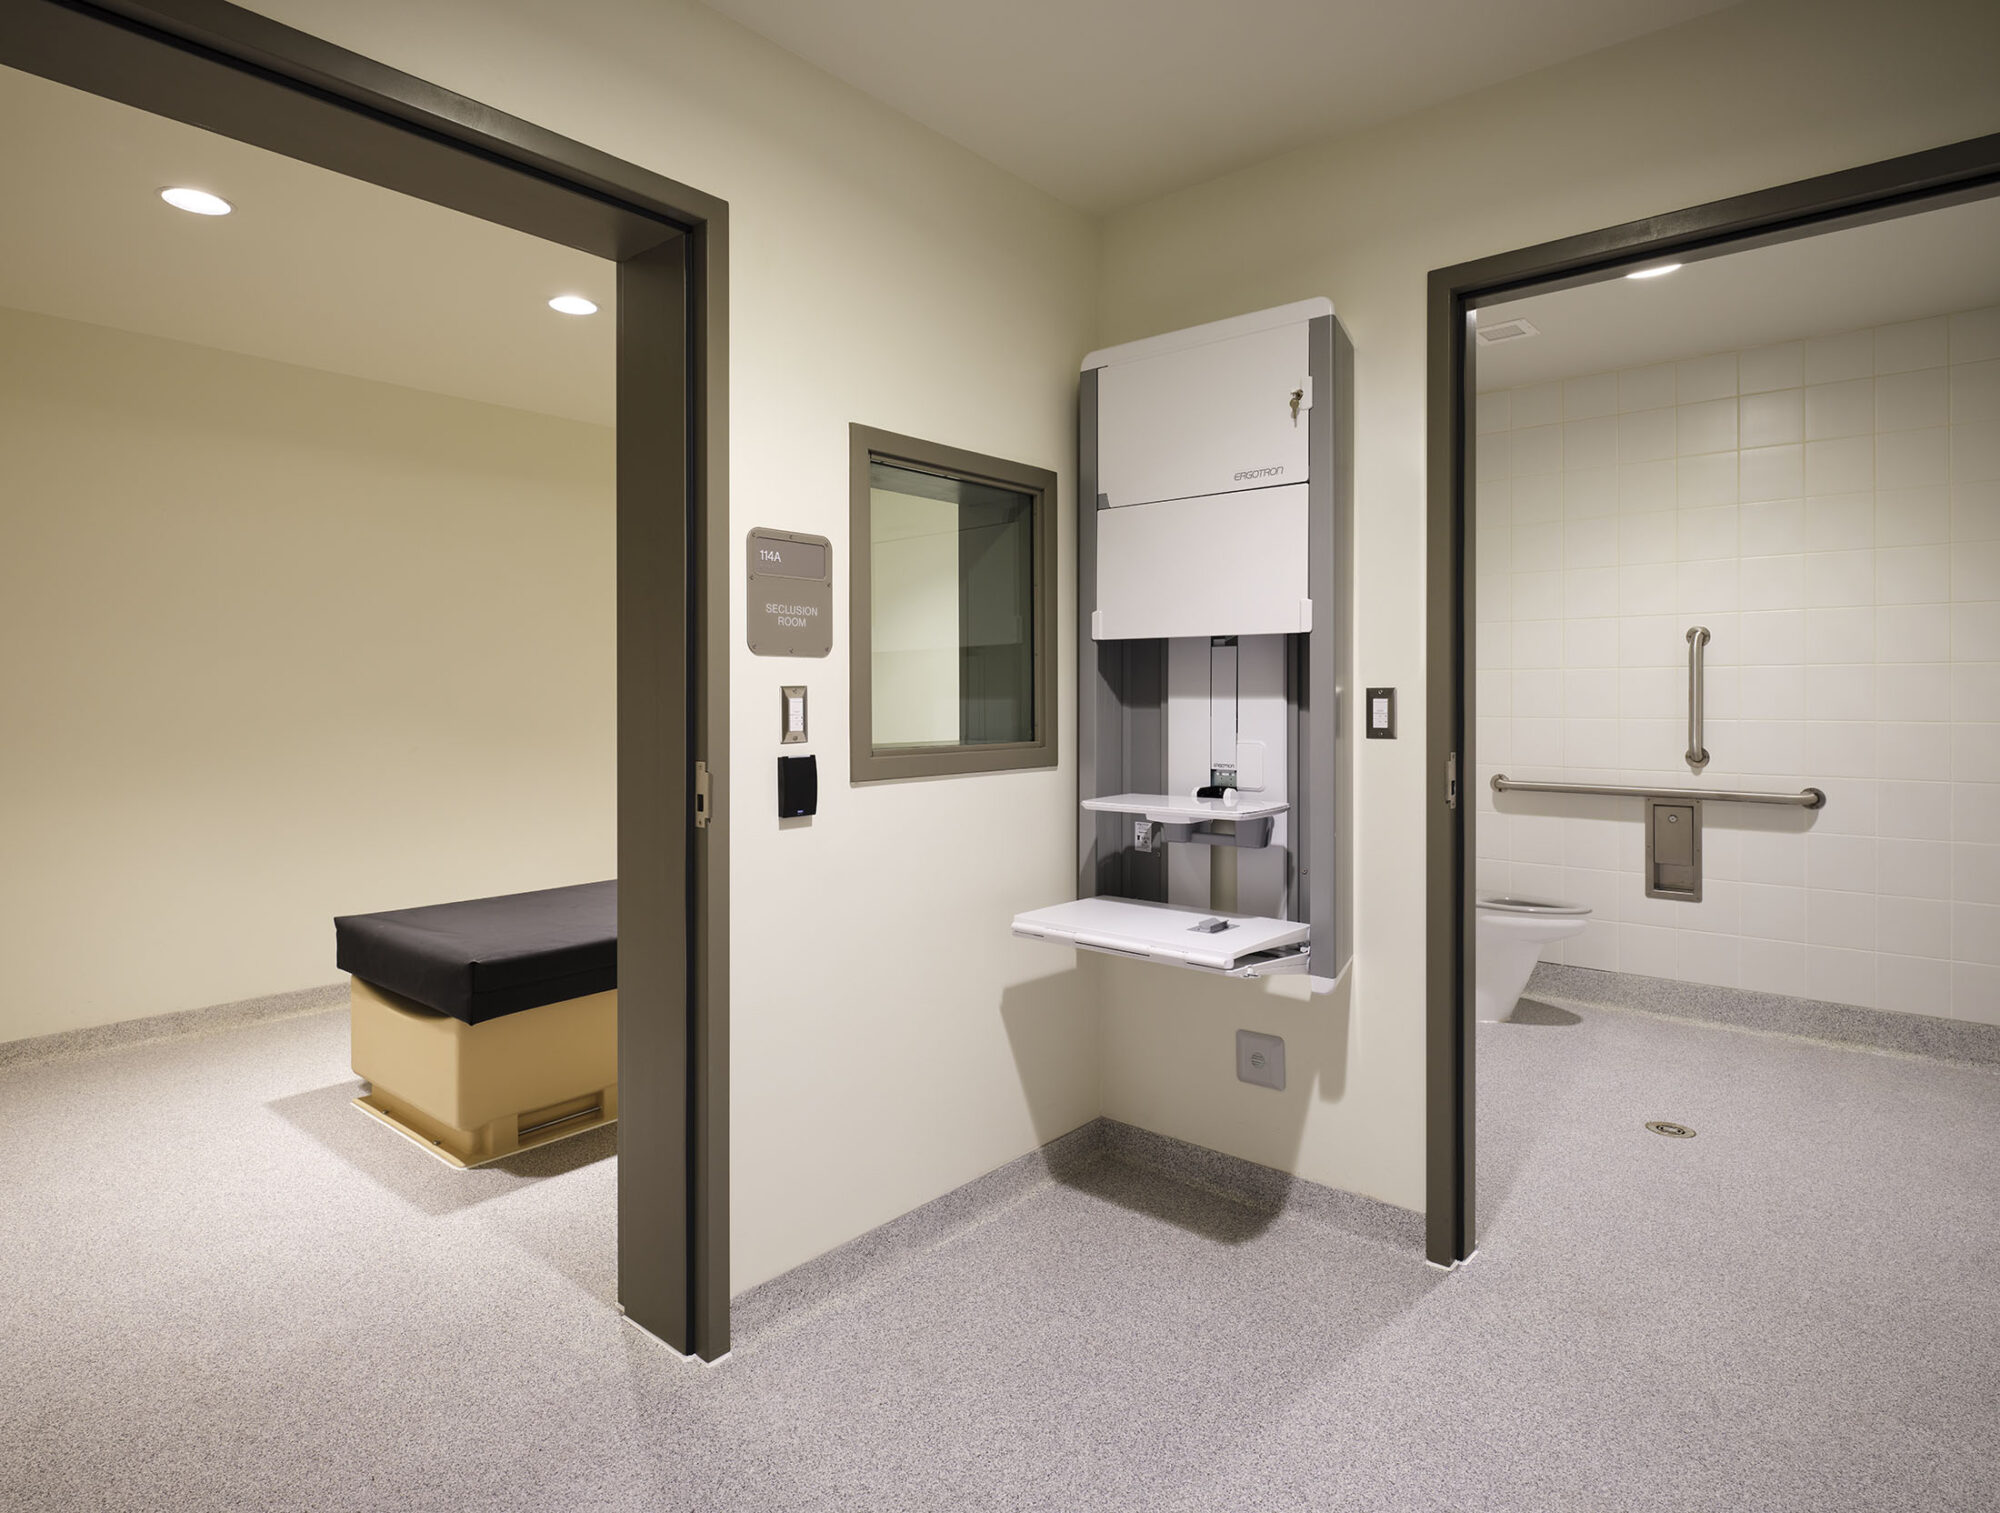 Interior clinical space at the WA DSHS Center for Behavioral Health at Maple Lane.